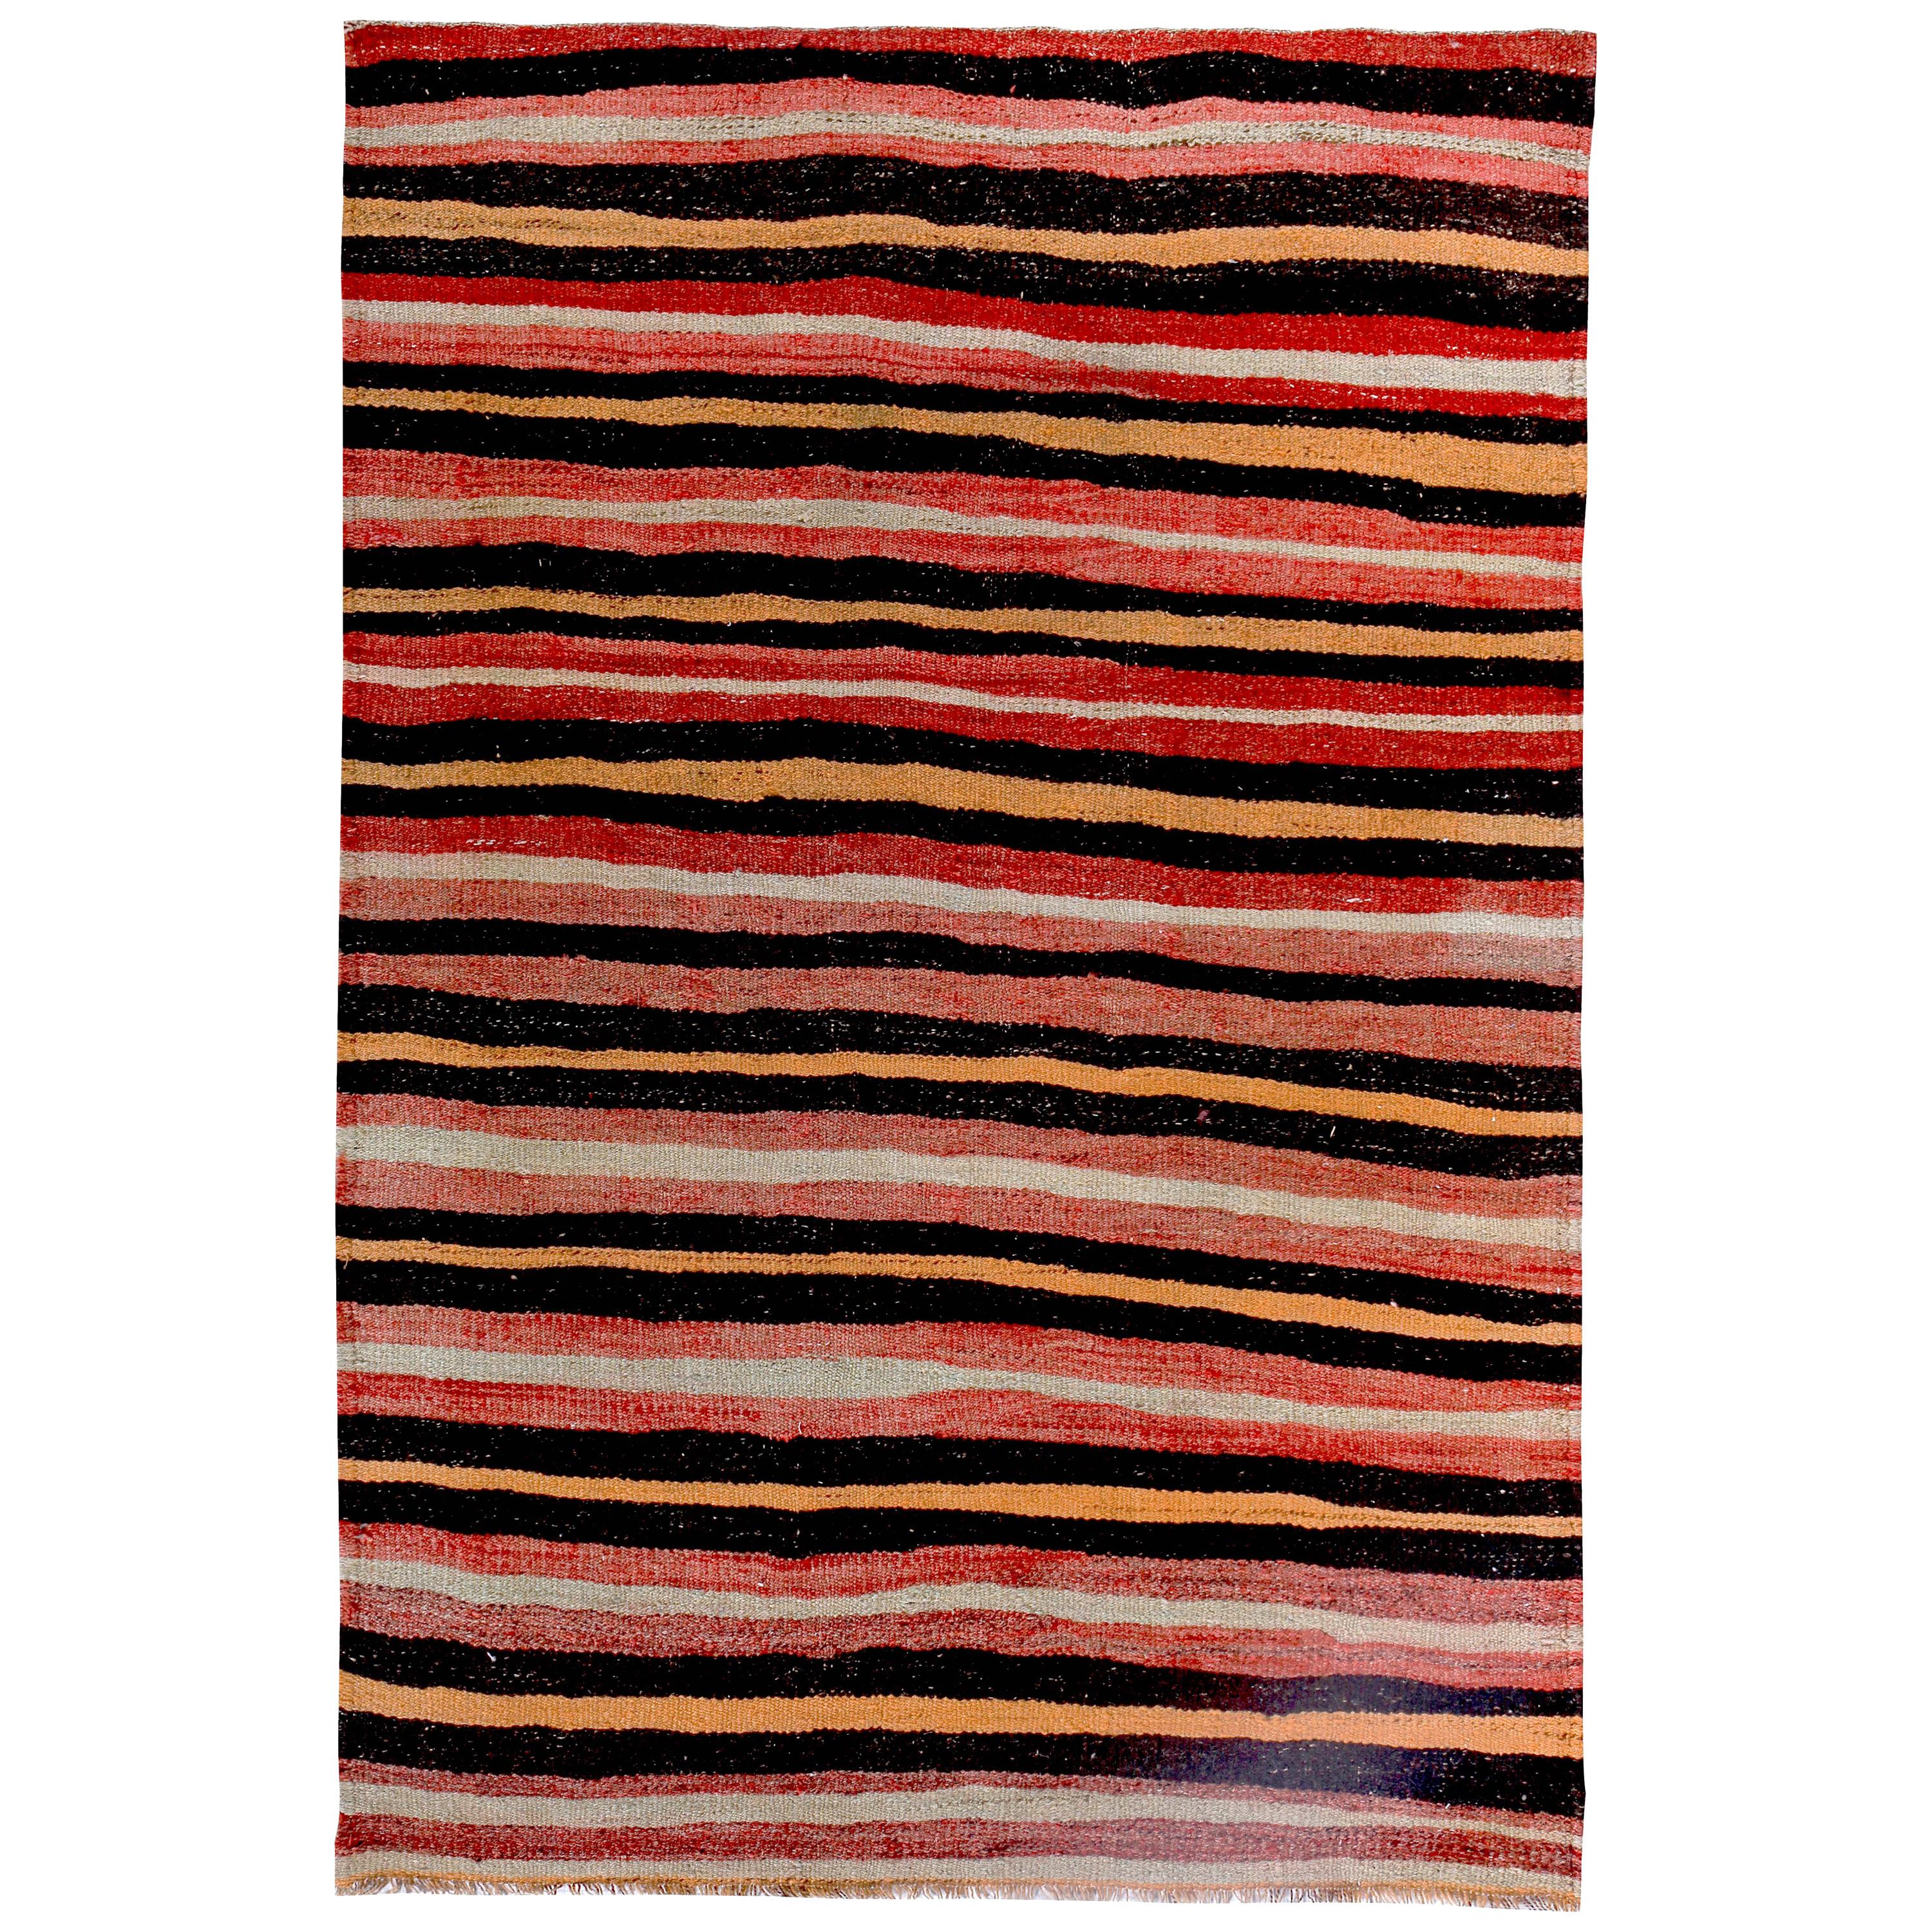 Turkish Kilim Rug with Black and Orange Stripes on Red and Ivory Field For Sale